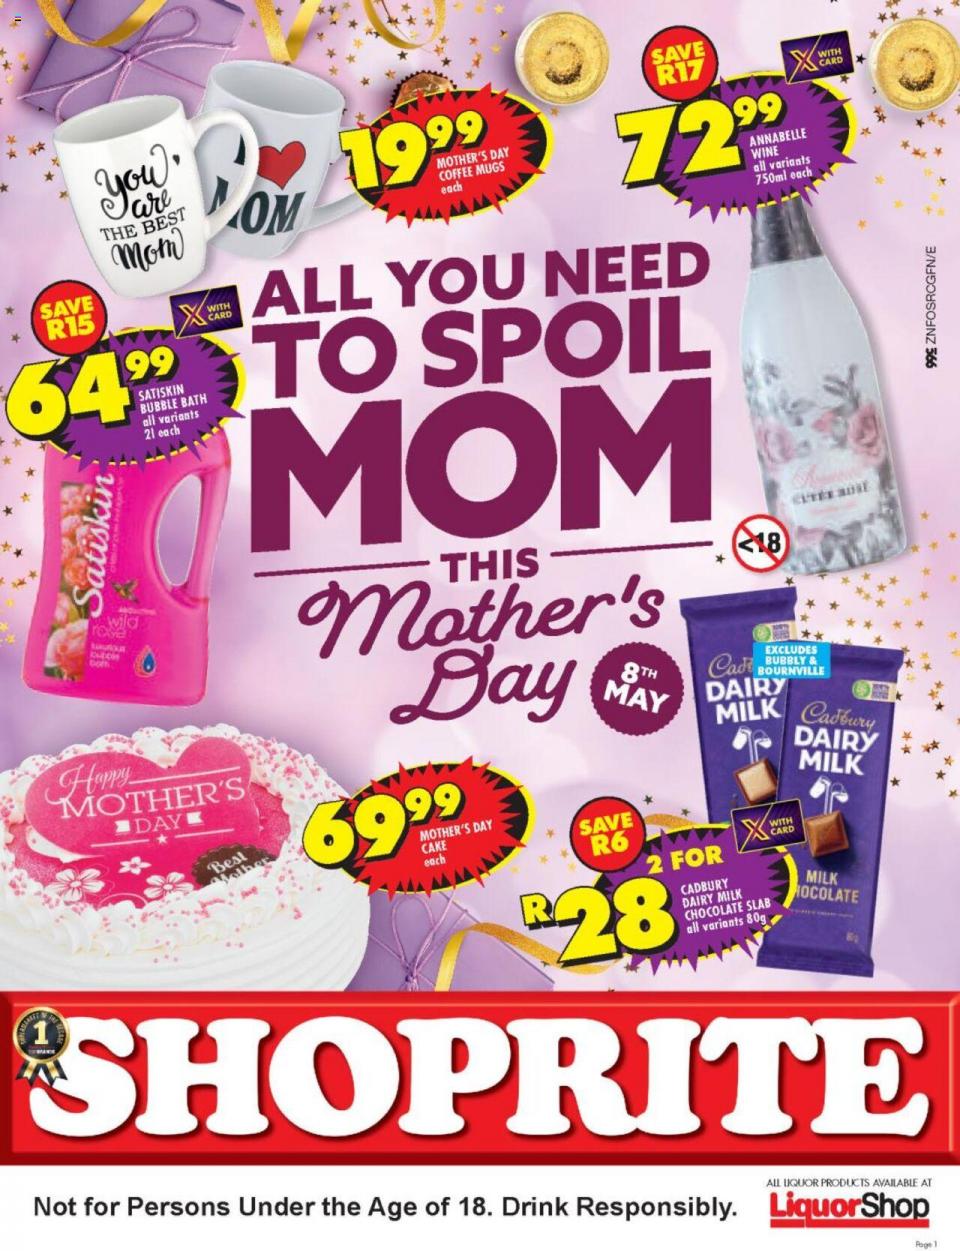 Shoprite Specials Mother’s Day 2022